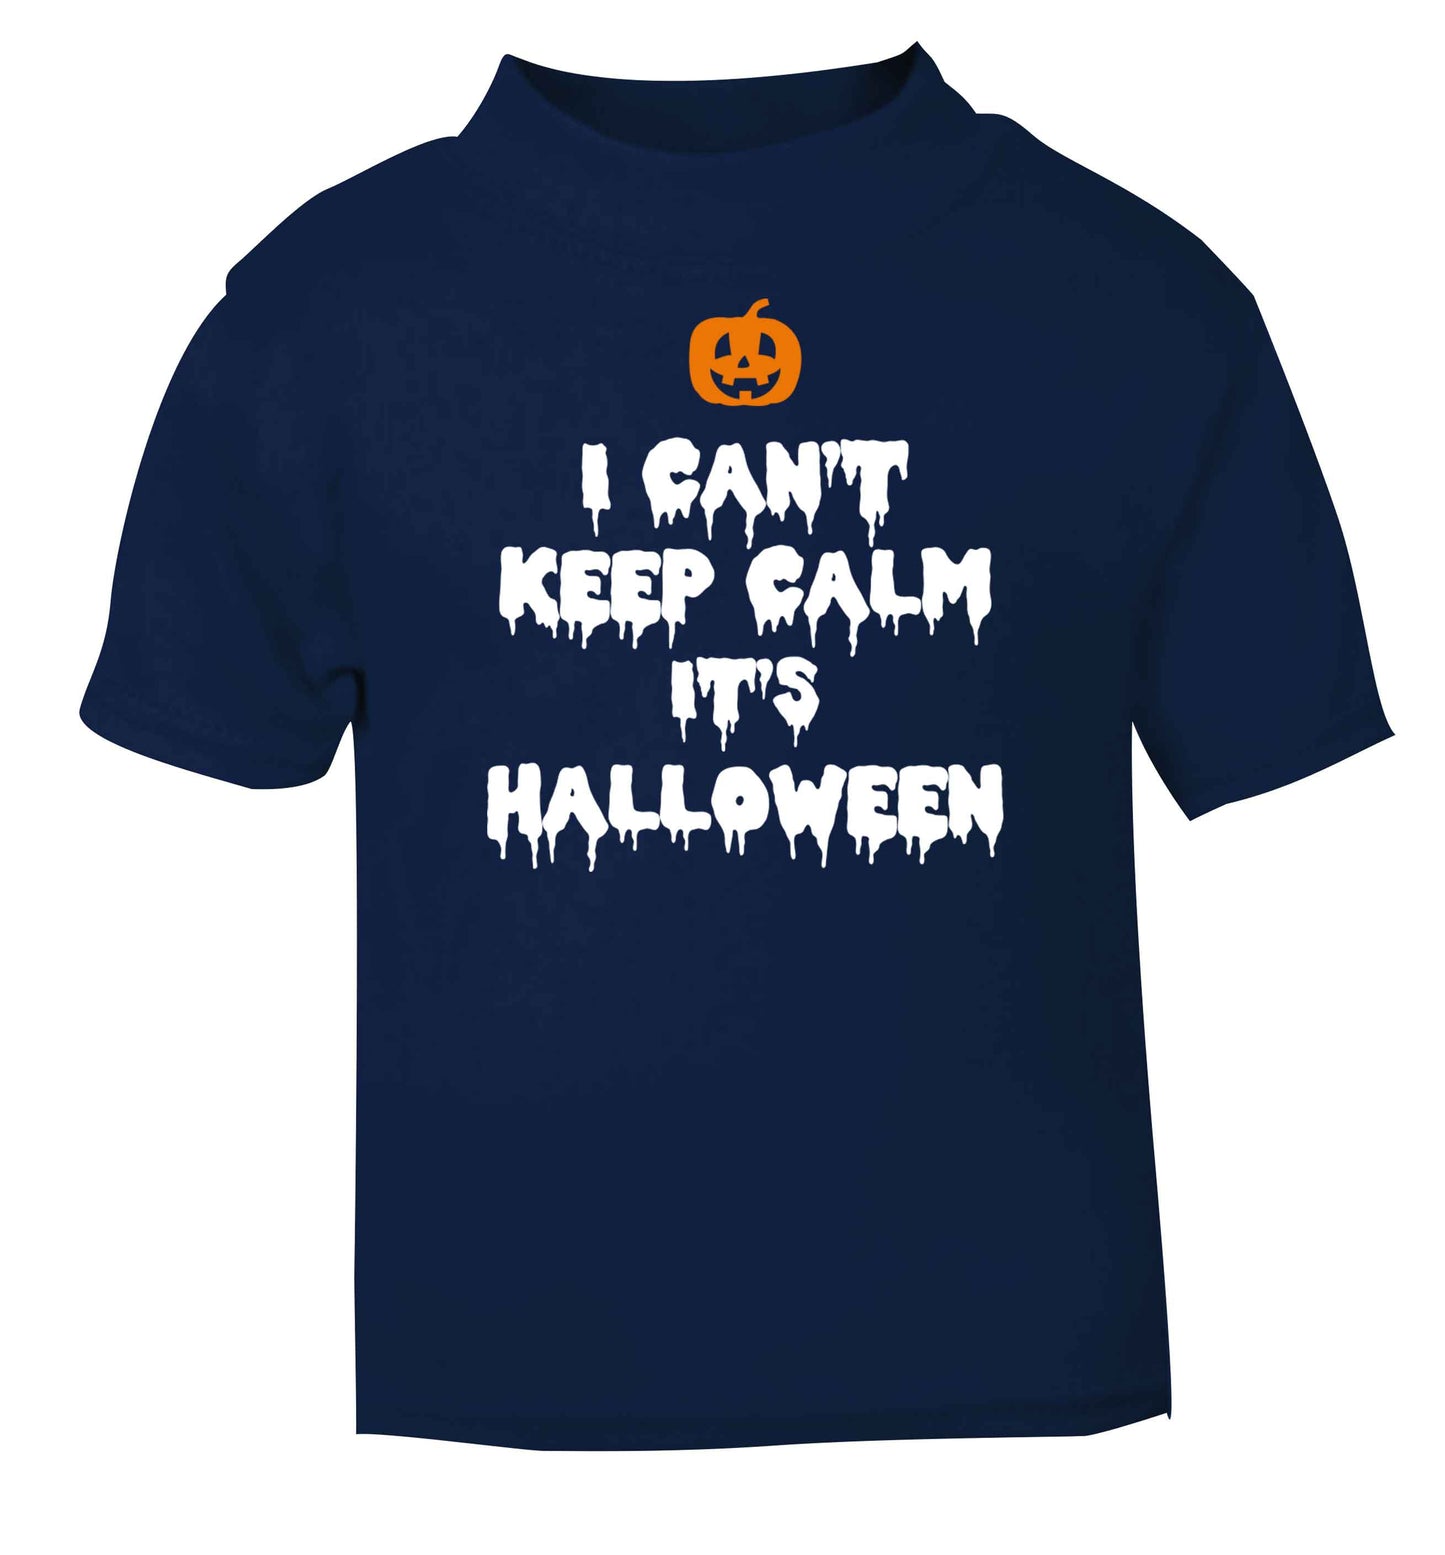 I can't keep calm it's halloween navy baby toddler Tshirt 2 Years